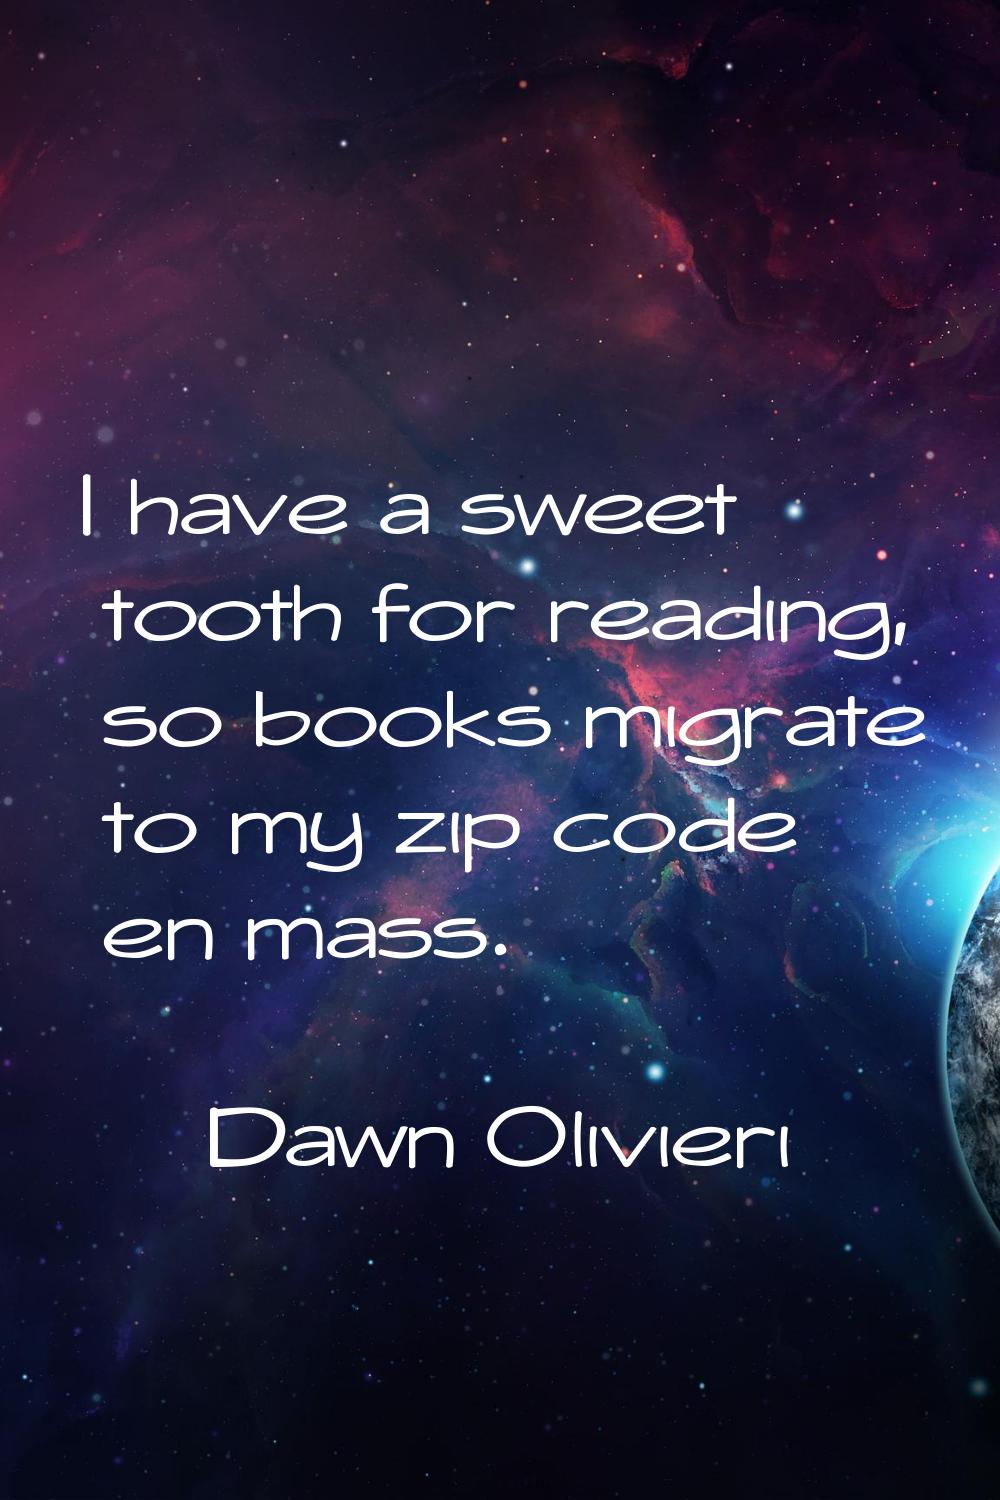 I have a sweet tooth for reading, so books migrate to my zip code en mass.